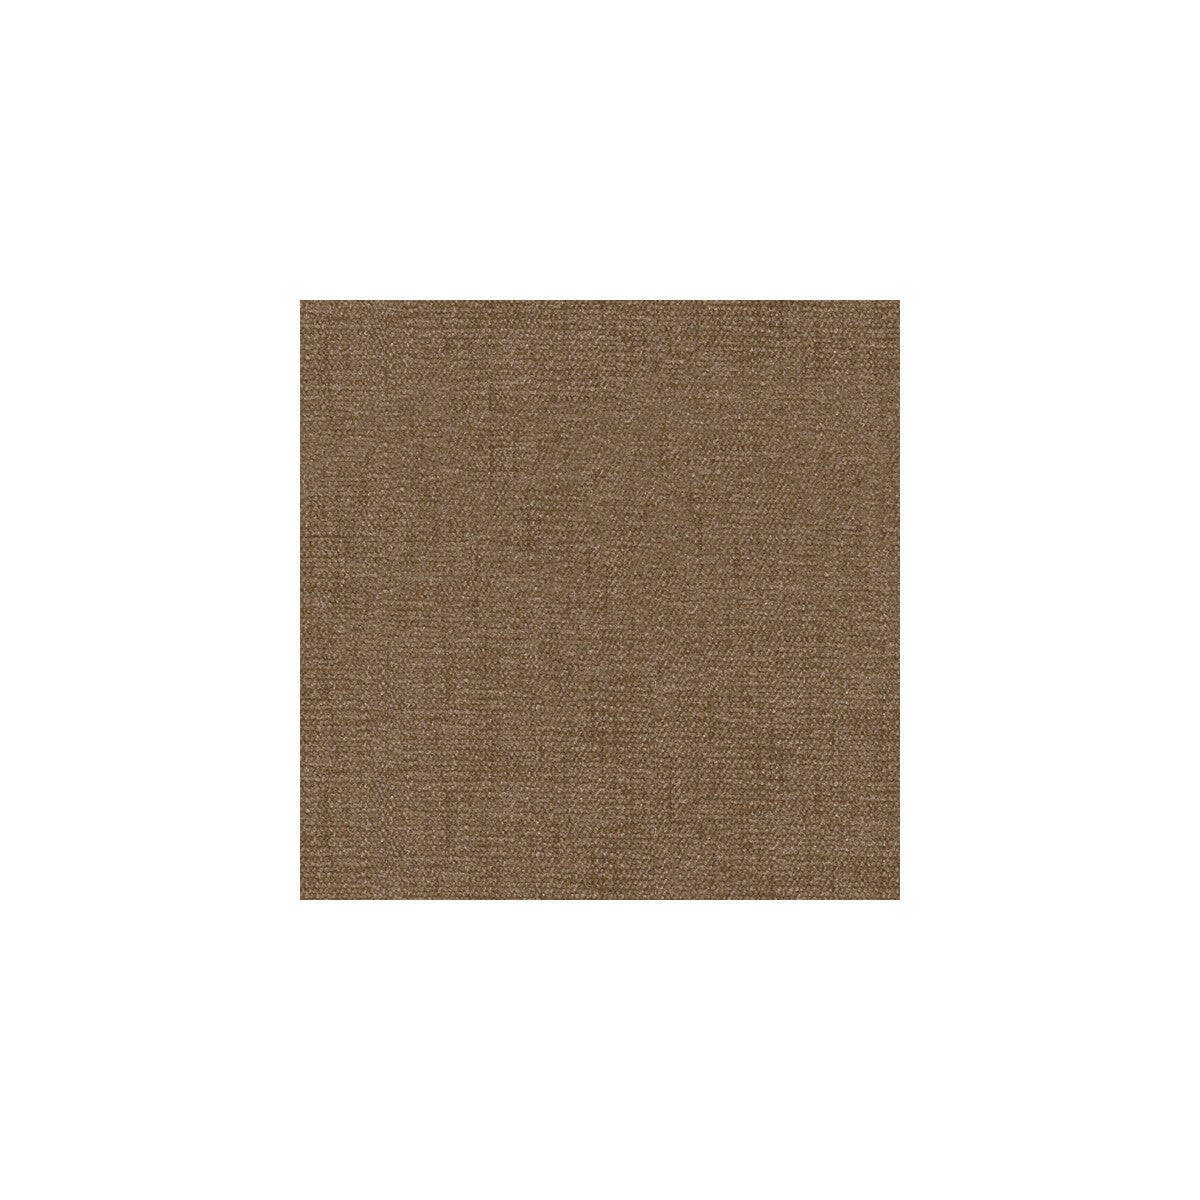 Kravet Contract fabric in 32148-1060 color - pattern 32148.1060.0 - by Kravet Contract